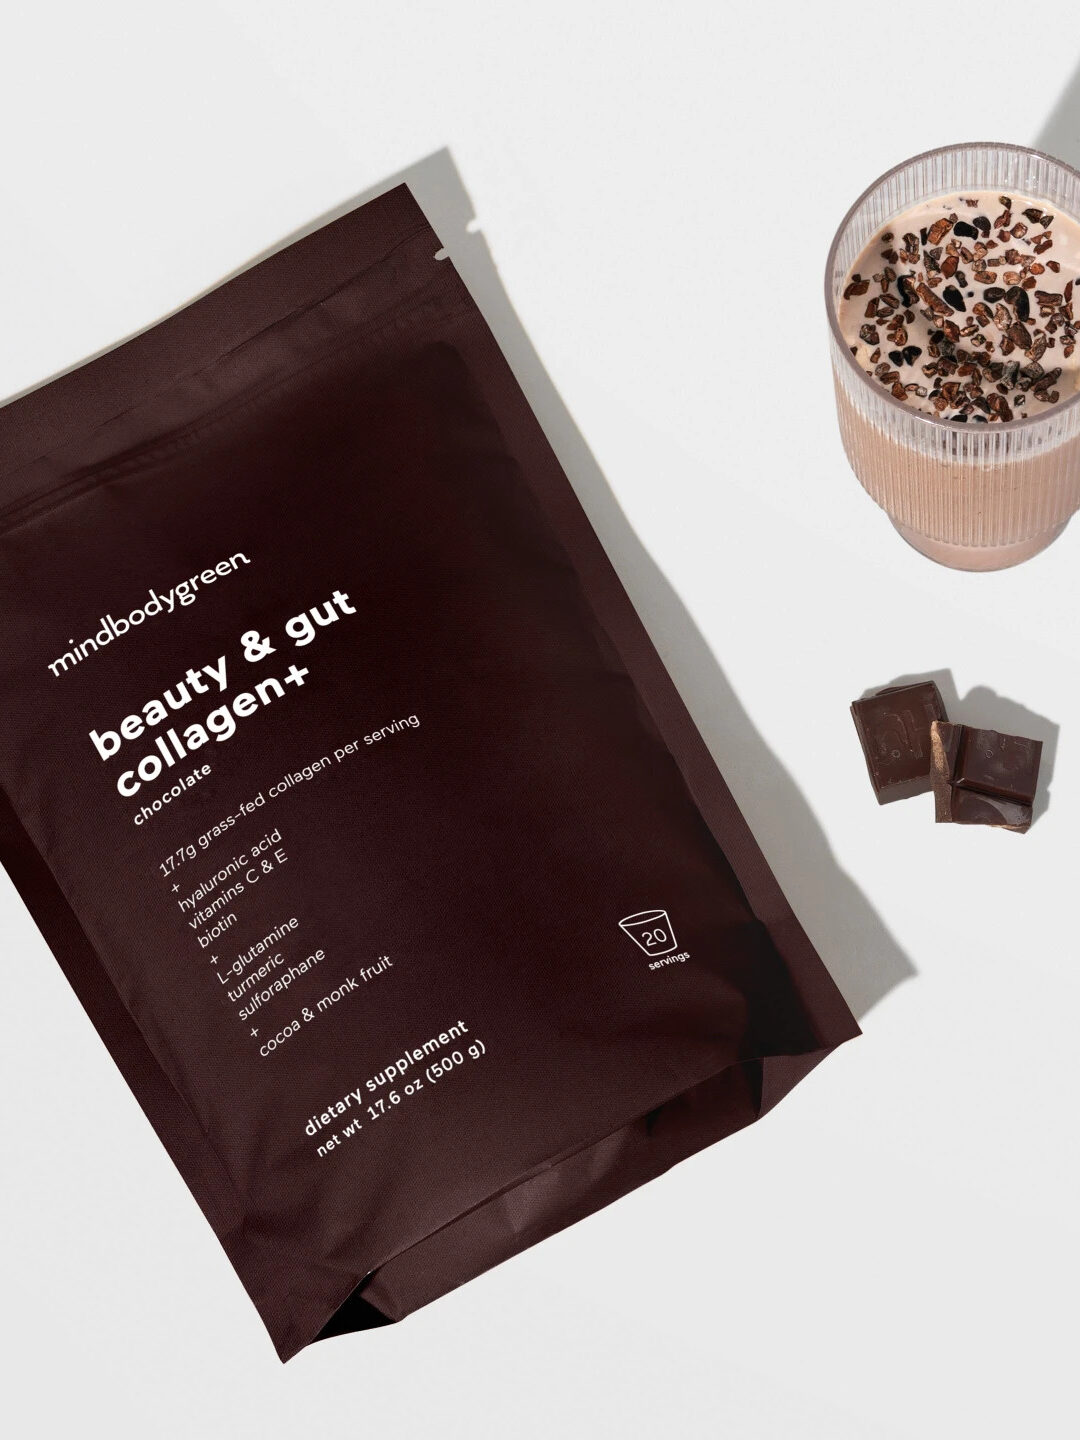 A pack of mindbodygreen chocolate collagen next to two piece of chocolate and a chocolate drink.